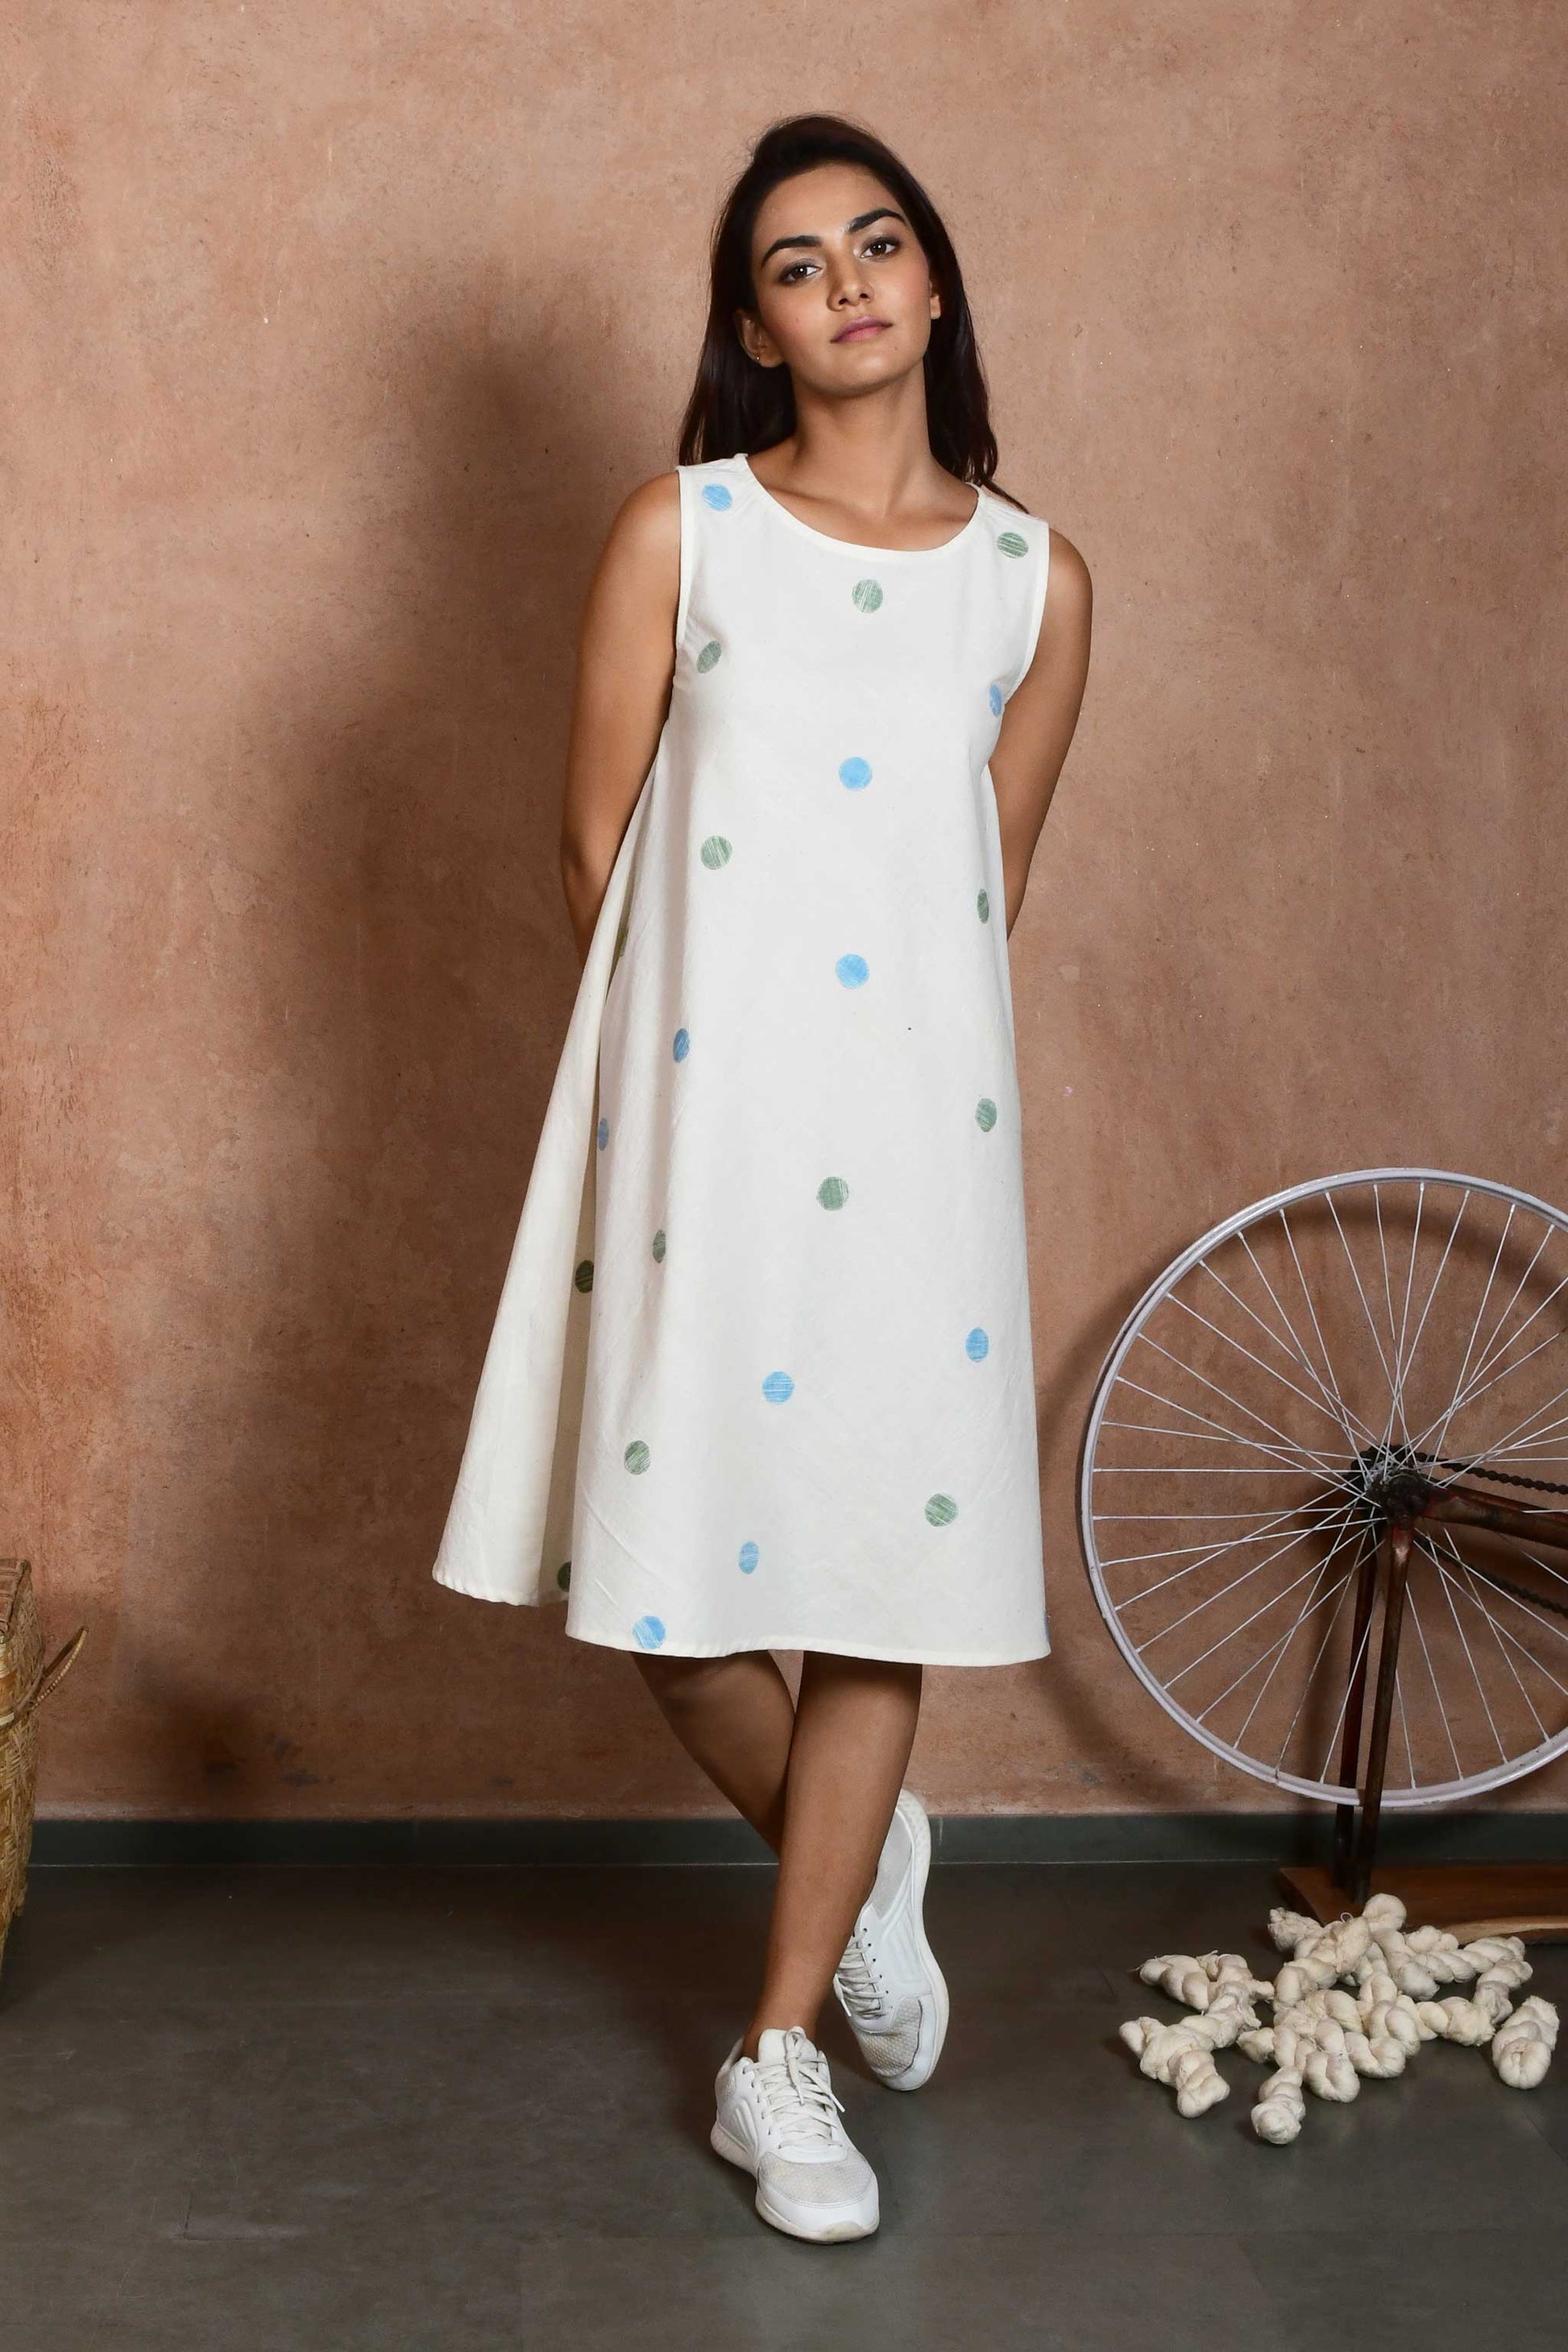 Front pose of an indian model wearing a handspun handloom cotton sleeveless dress that is knee length with green and blue polka dot patches.